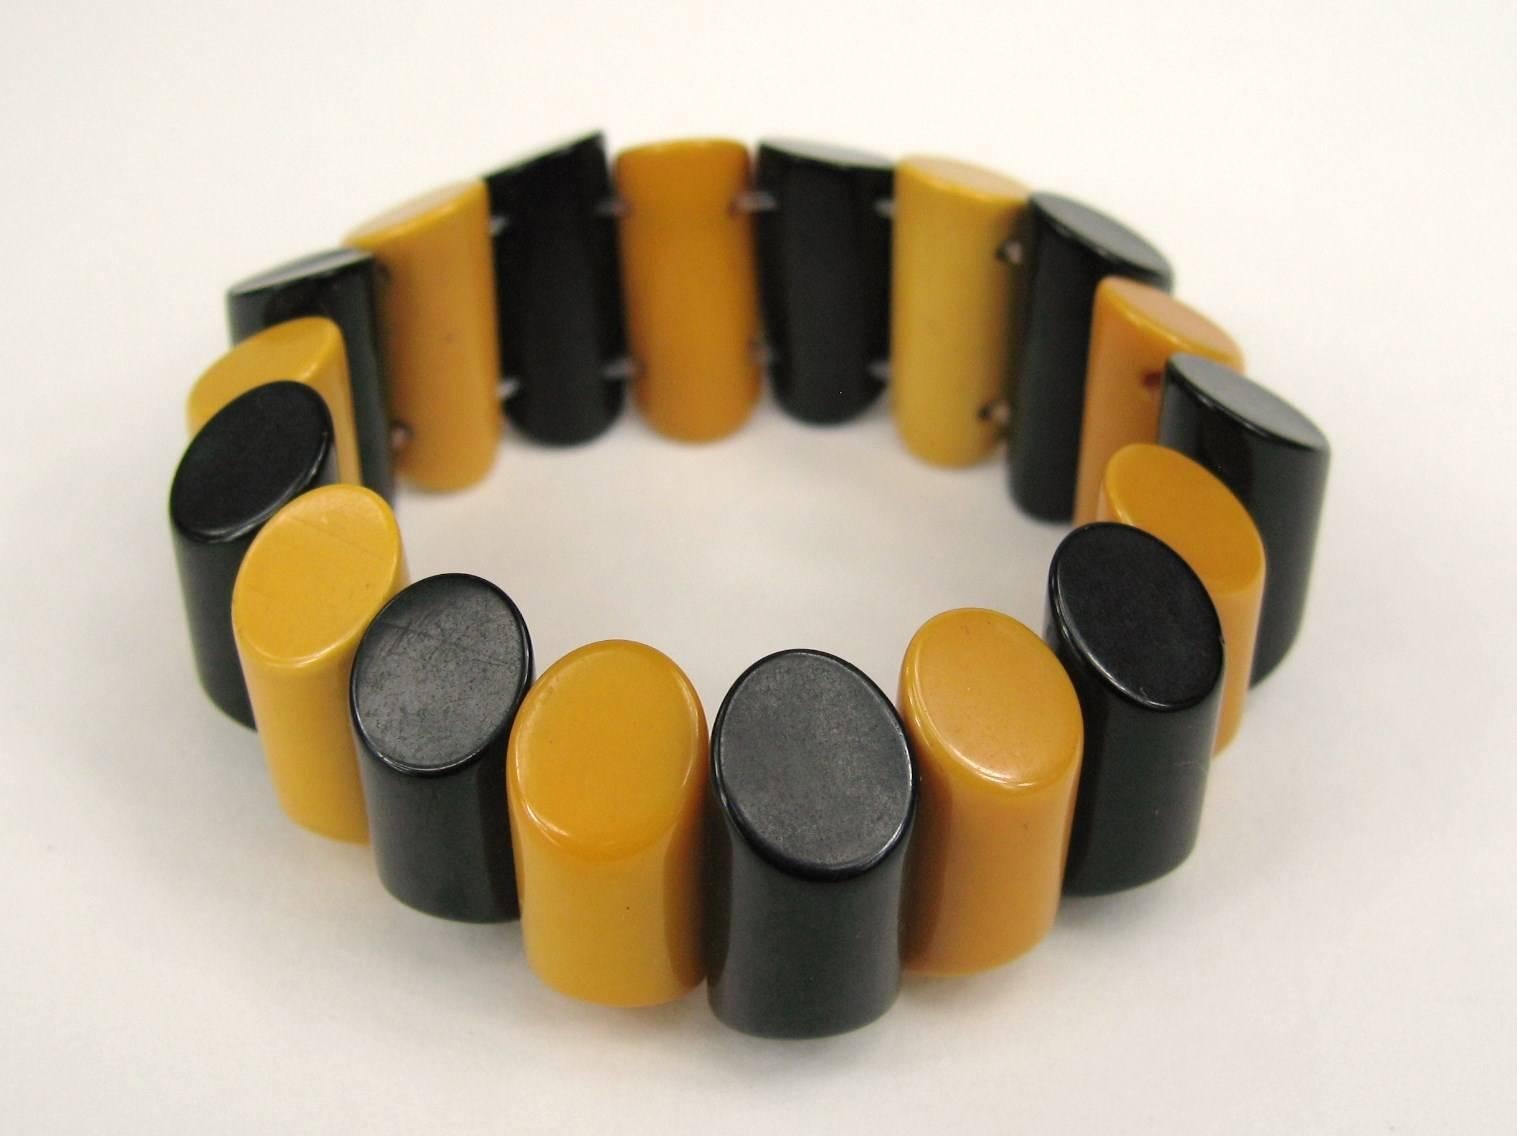 Another stunning Bakelite Bracelet. A fun vintage Bakelite / Catalin stretch bracelet in a rich butterscotch and Black. The bracelet is made up of narrow strips of Bakelite strung on heavy elastic. The thin panels have rounded edges, the top and